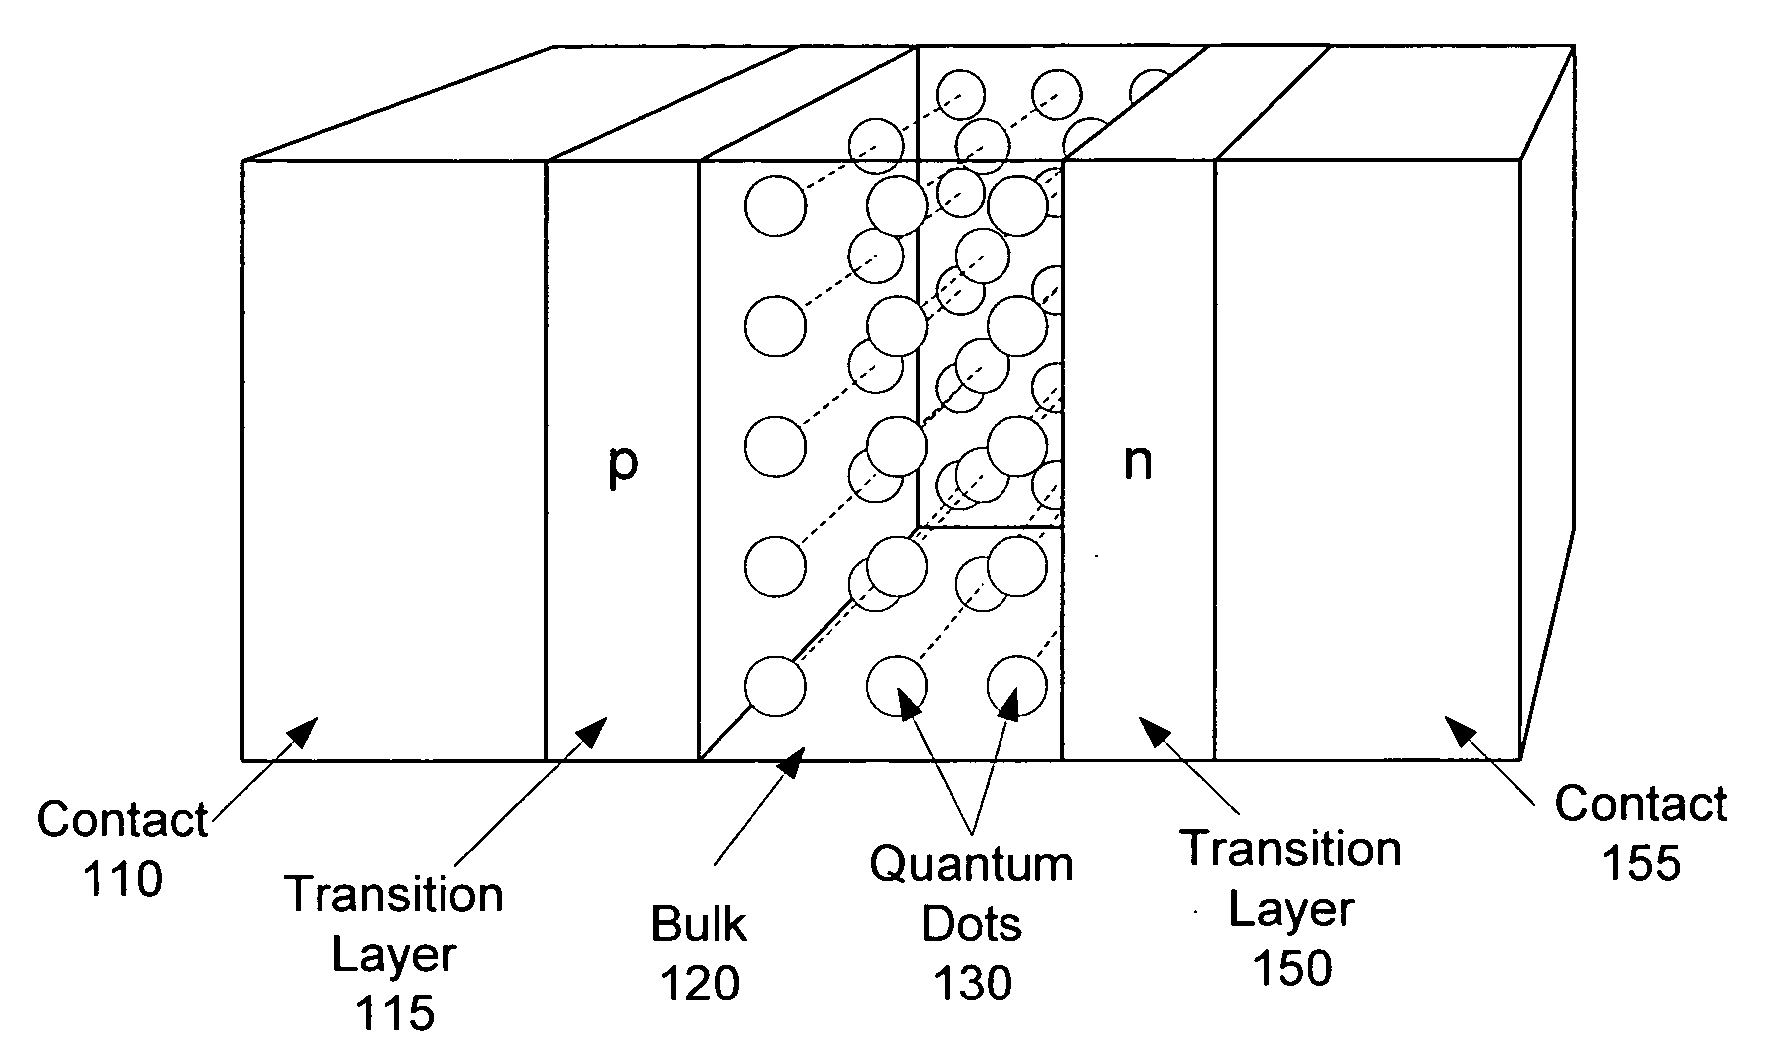 Intermediate-band photosensitive device with quantum dots having tunneling barrier embedded in inorganic matrix